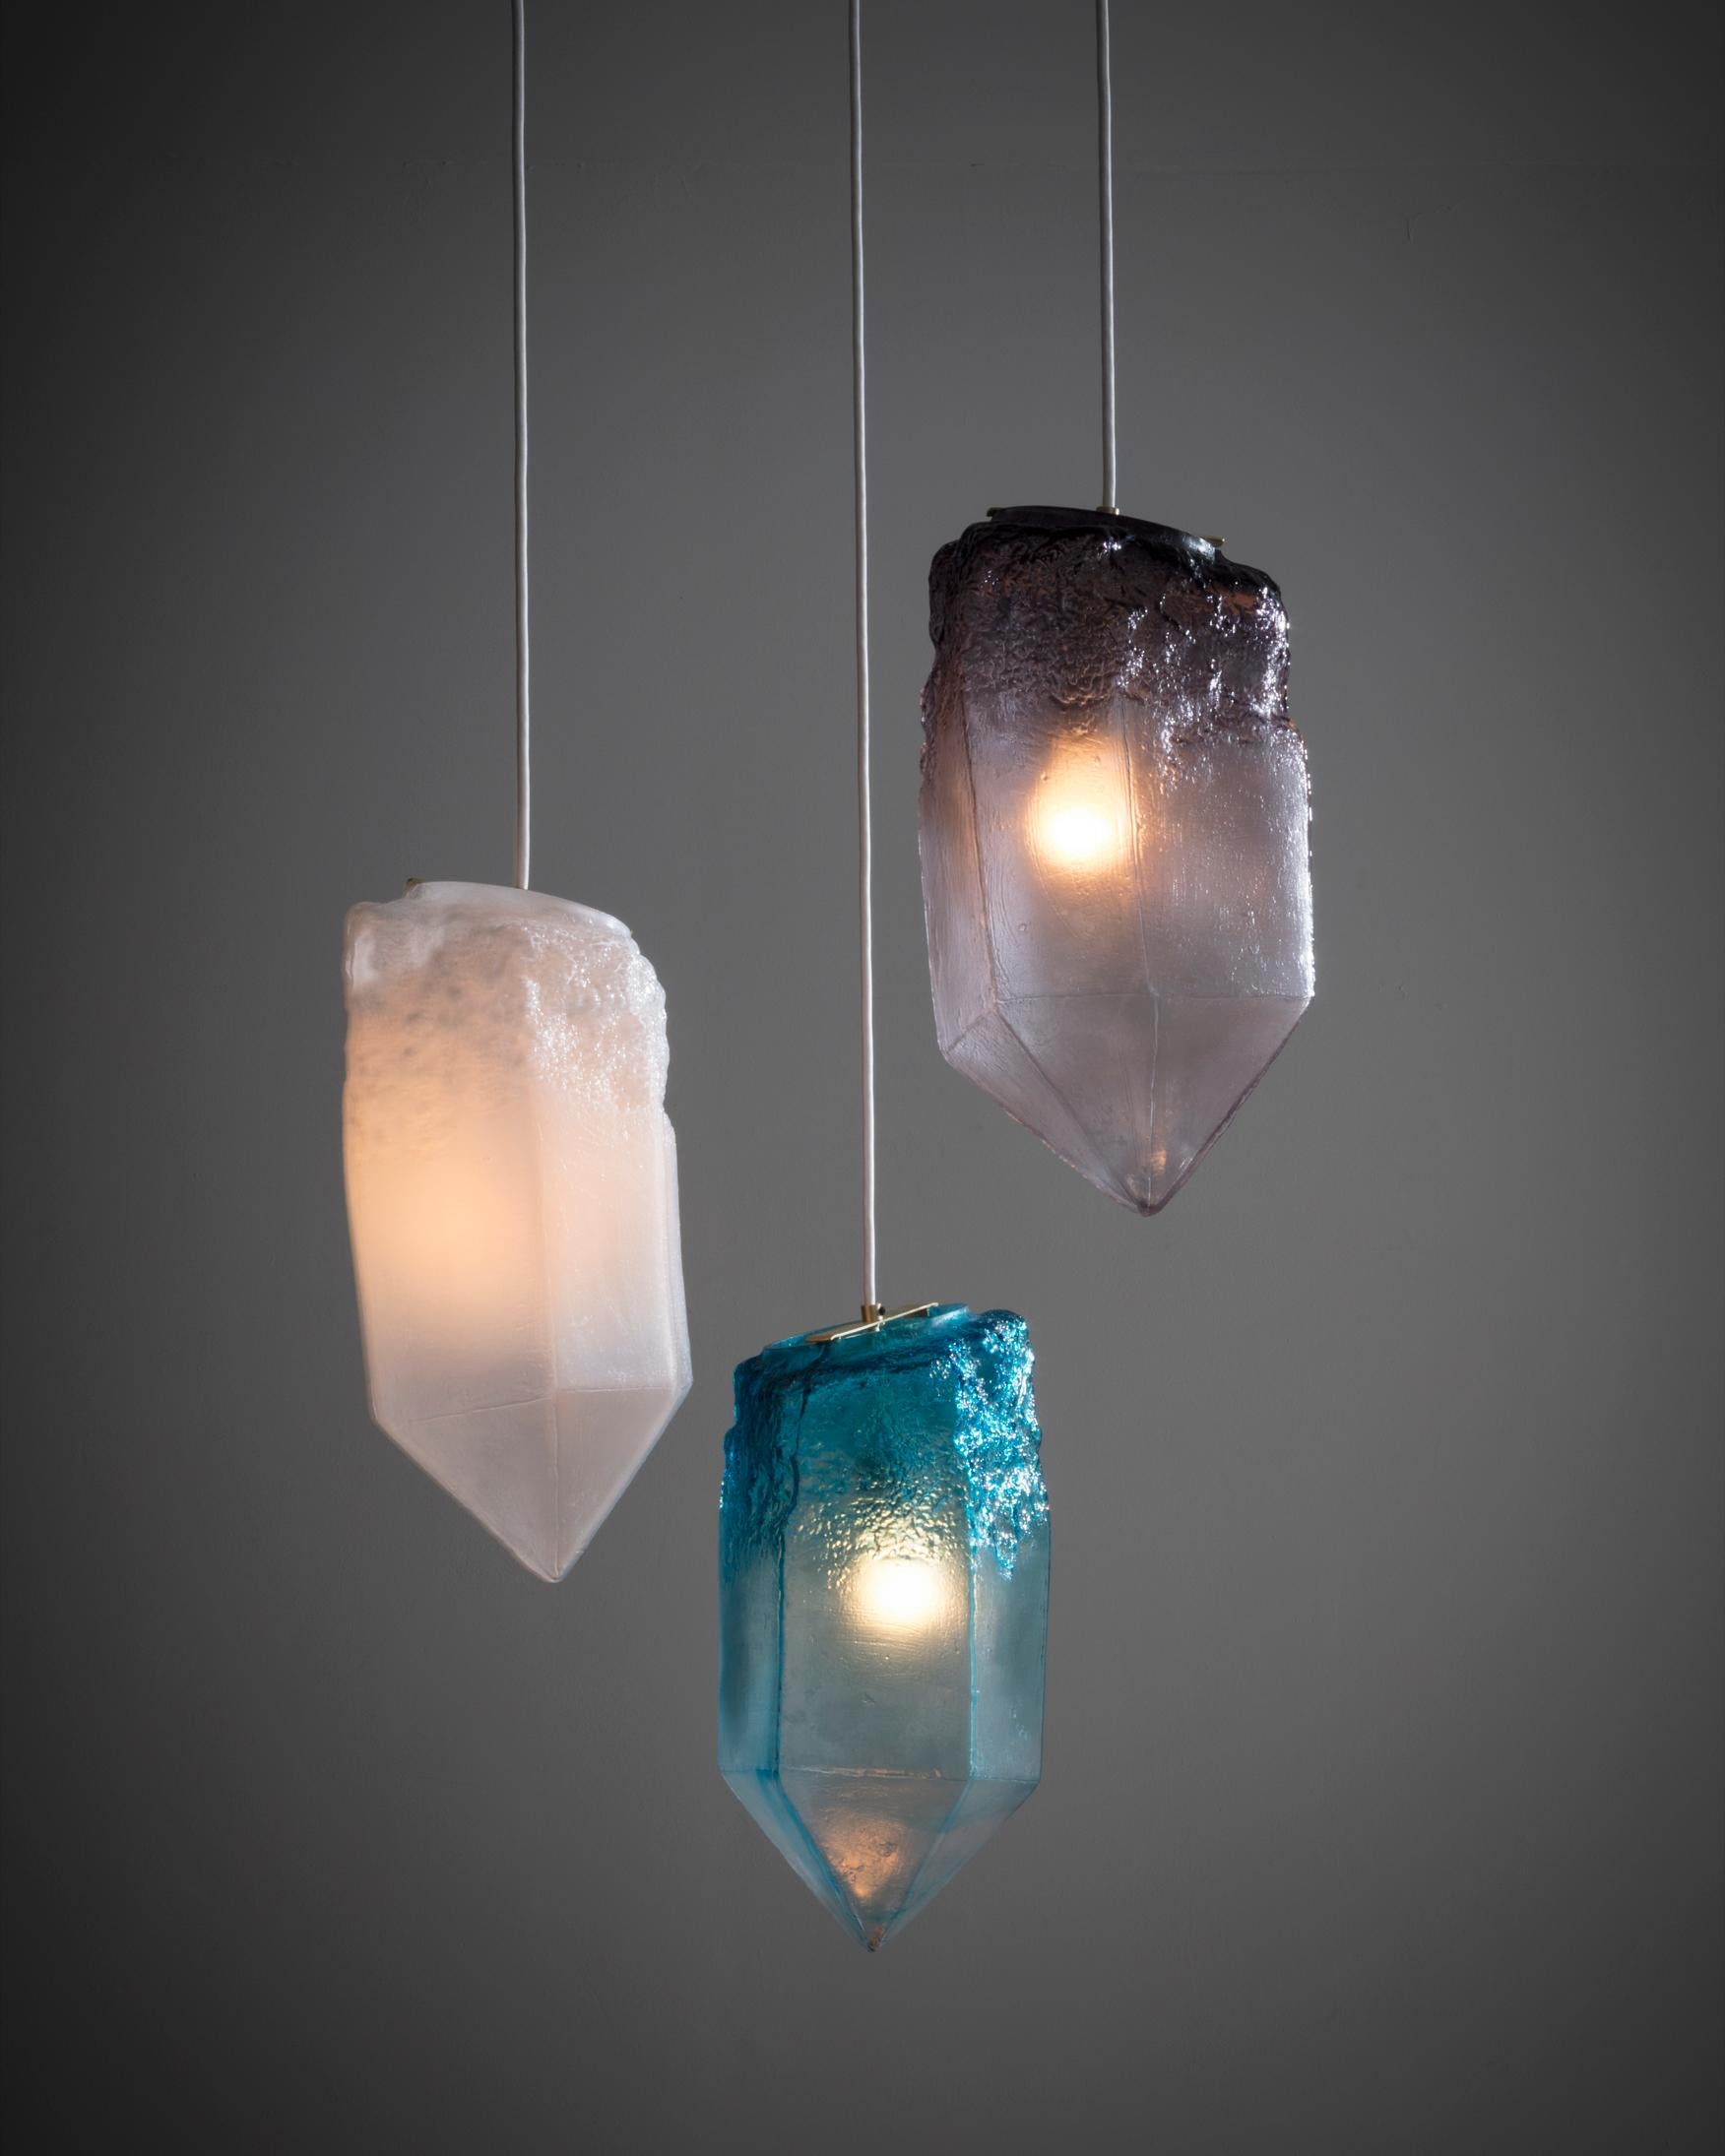 American Crystal Pendant Light in Hand Blown Turquoise Glass by Jeff Zimmerman, 2016